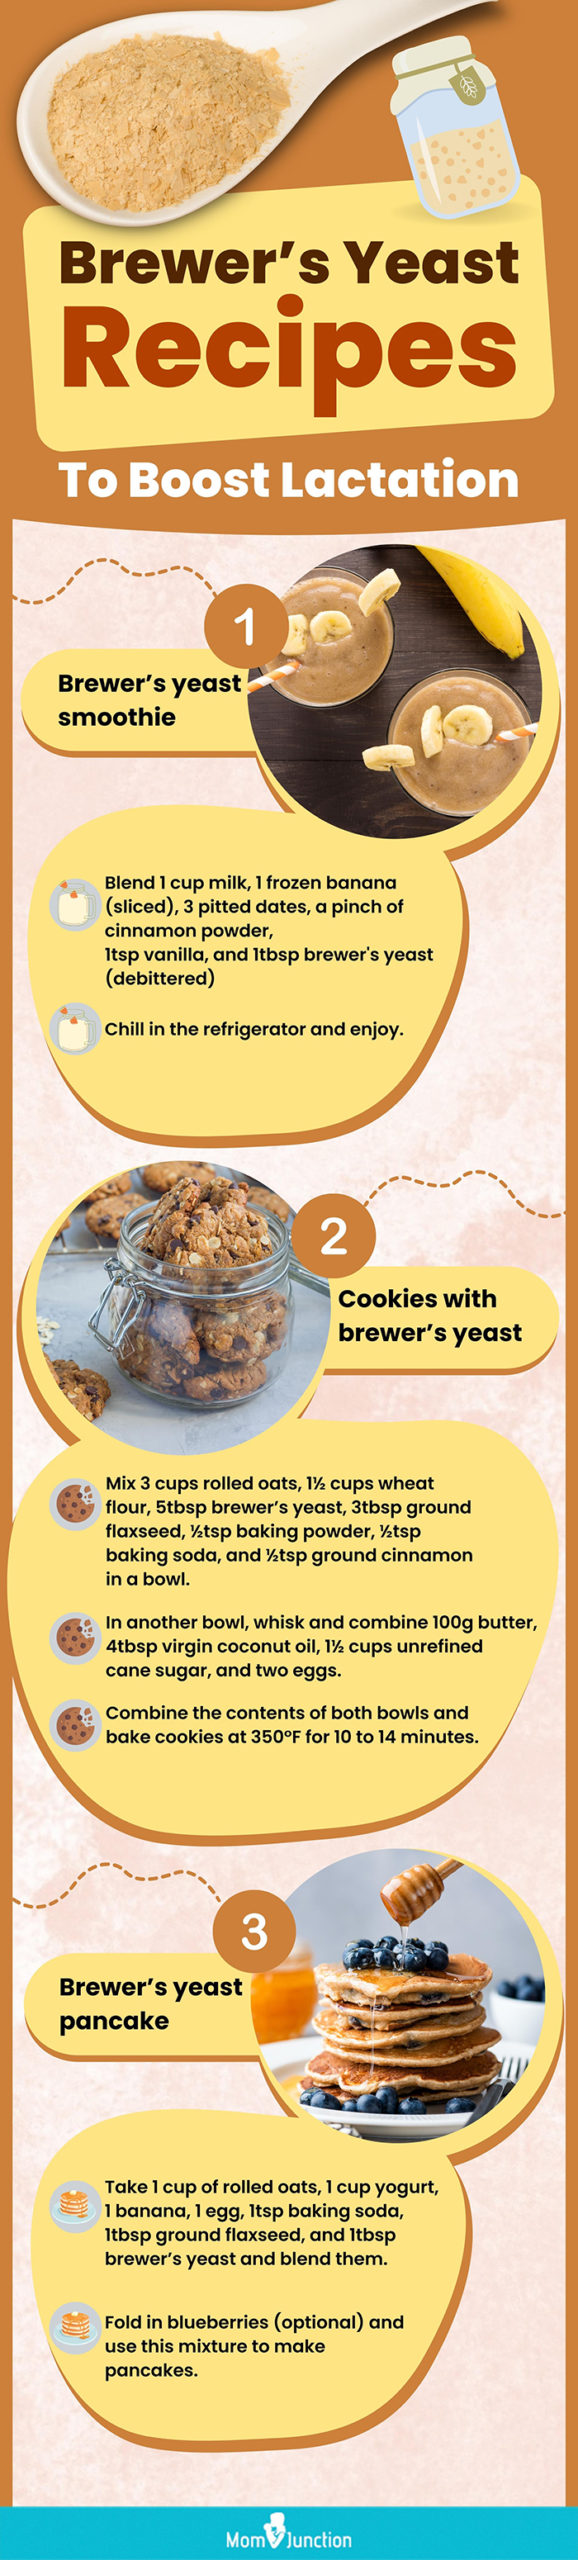 brewers yeast recipes to boost lactation [infographic]